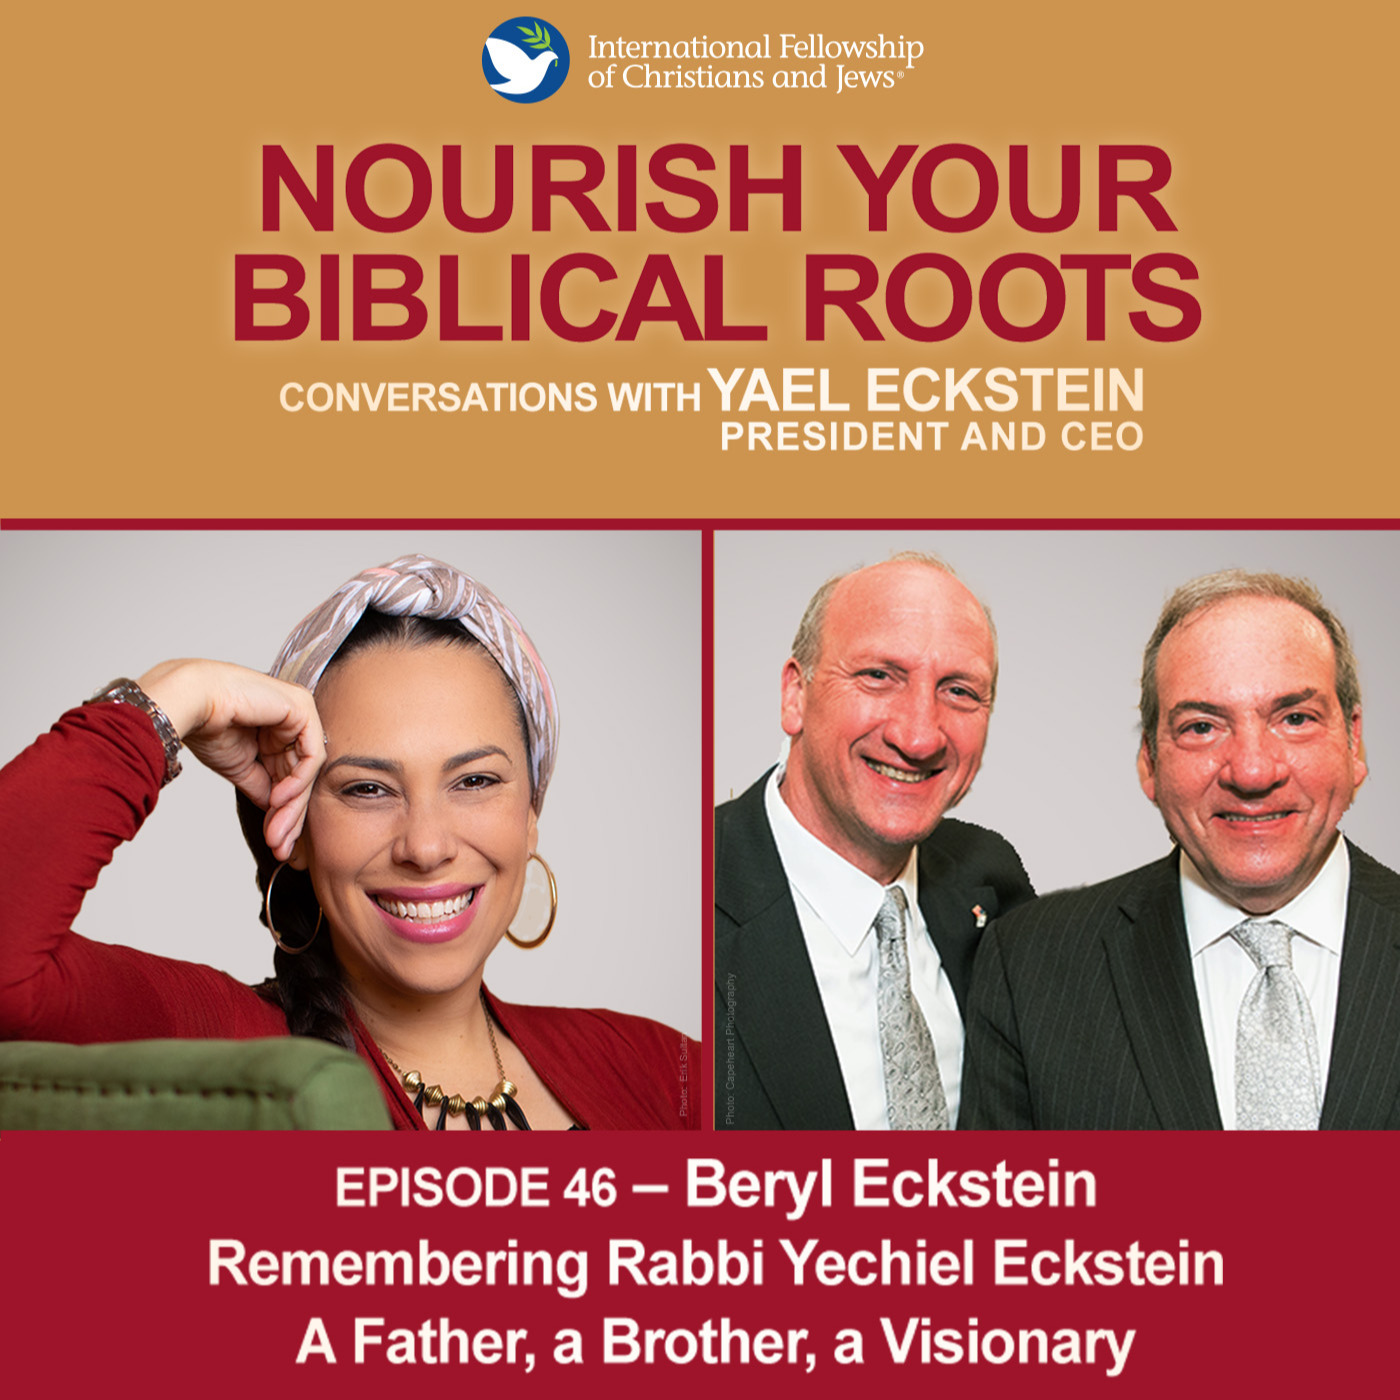 Remembering Rabbi Eckstein — A Father, a Brother, a Visionary